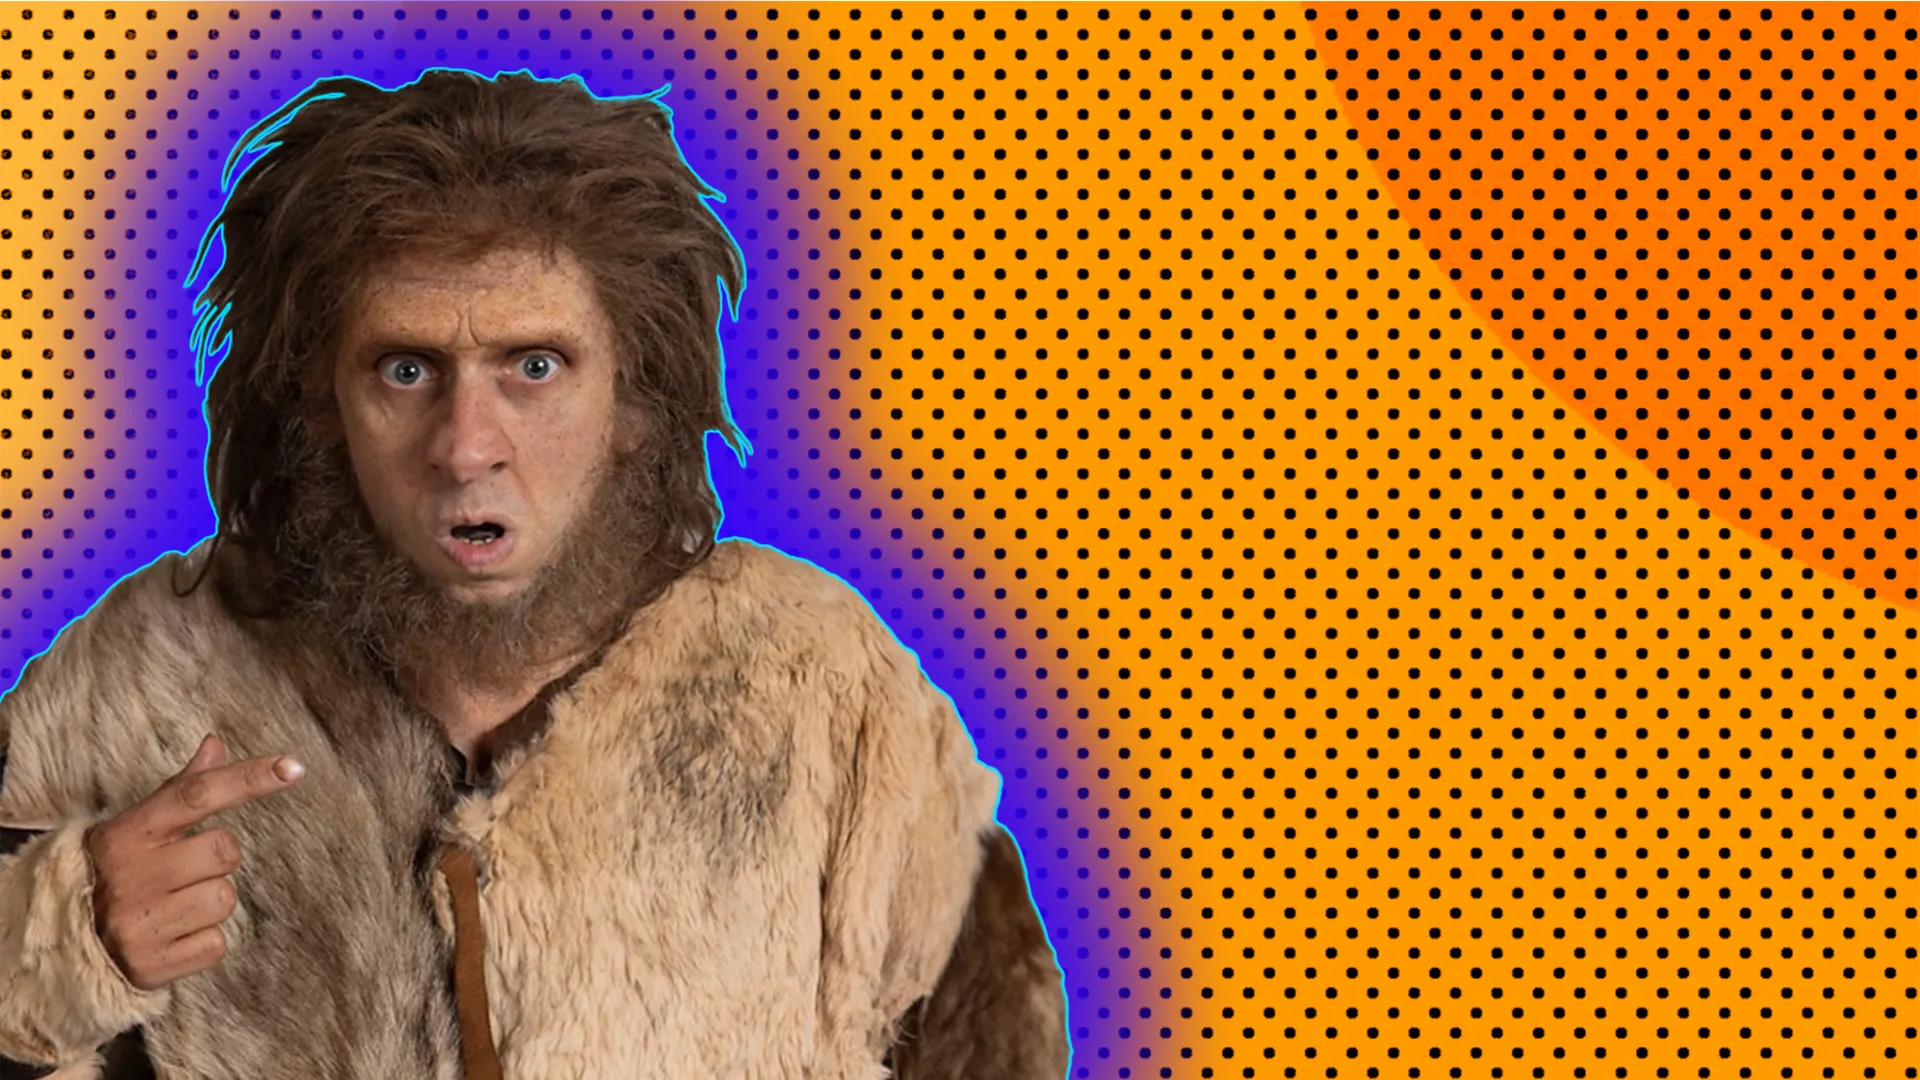 Actor Laurence Rickard as Robin the caveman against orange background